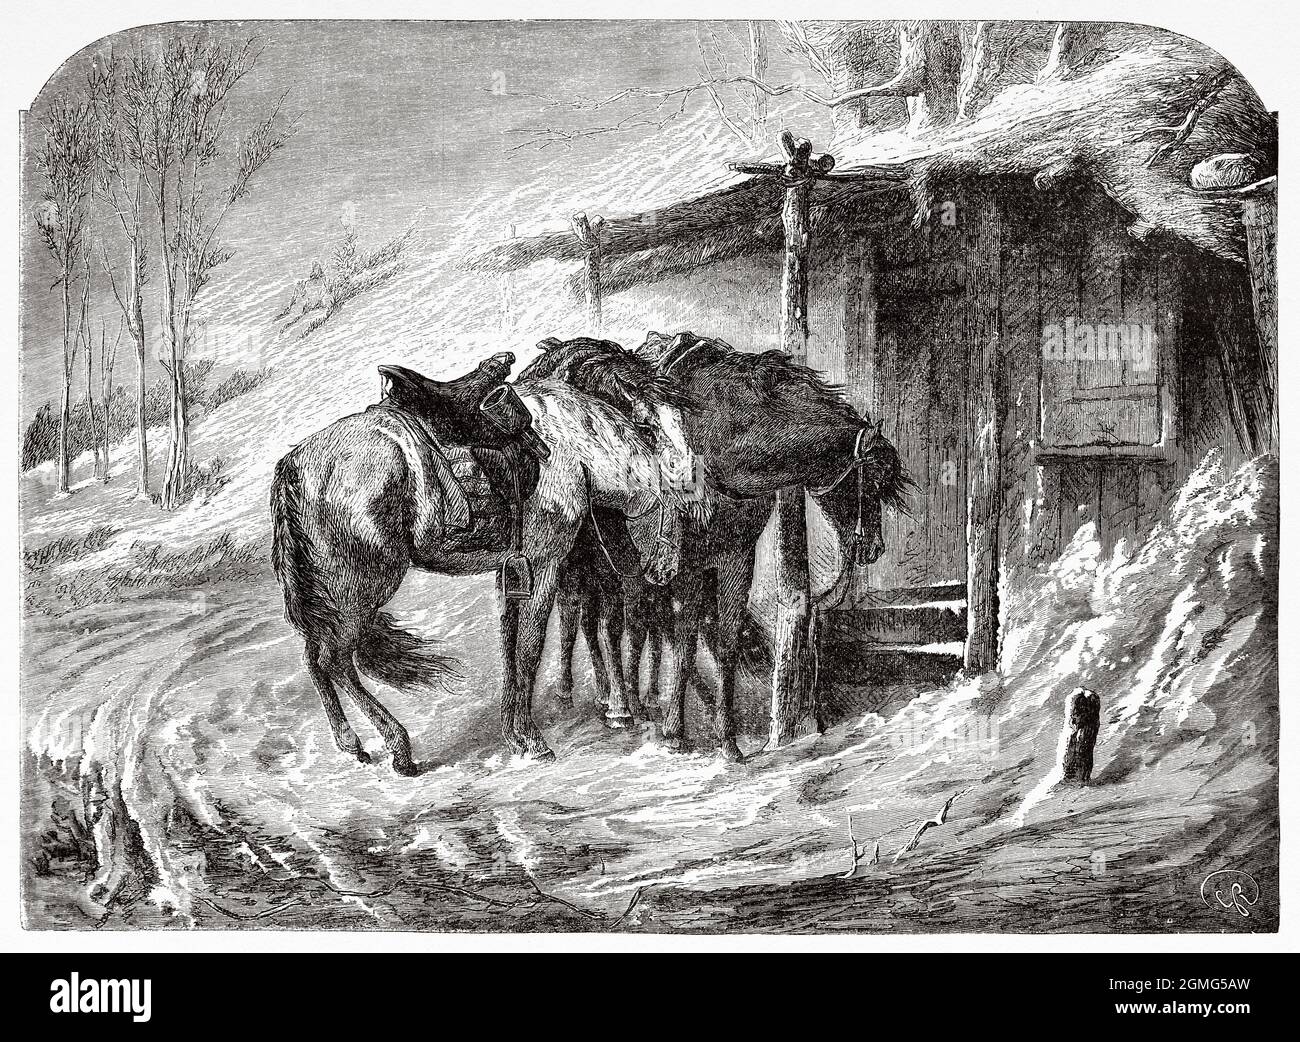 Cossack horses resting after a hard march through the snow, painting by Adolf Schreyer (1828-1899) was a 19th century German painter. Old 19th century engraved illustration from La Ilustración Artística 1882 Stock Photo